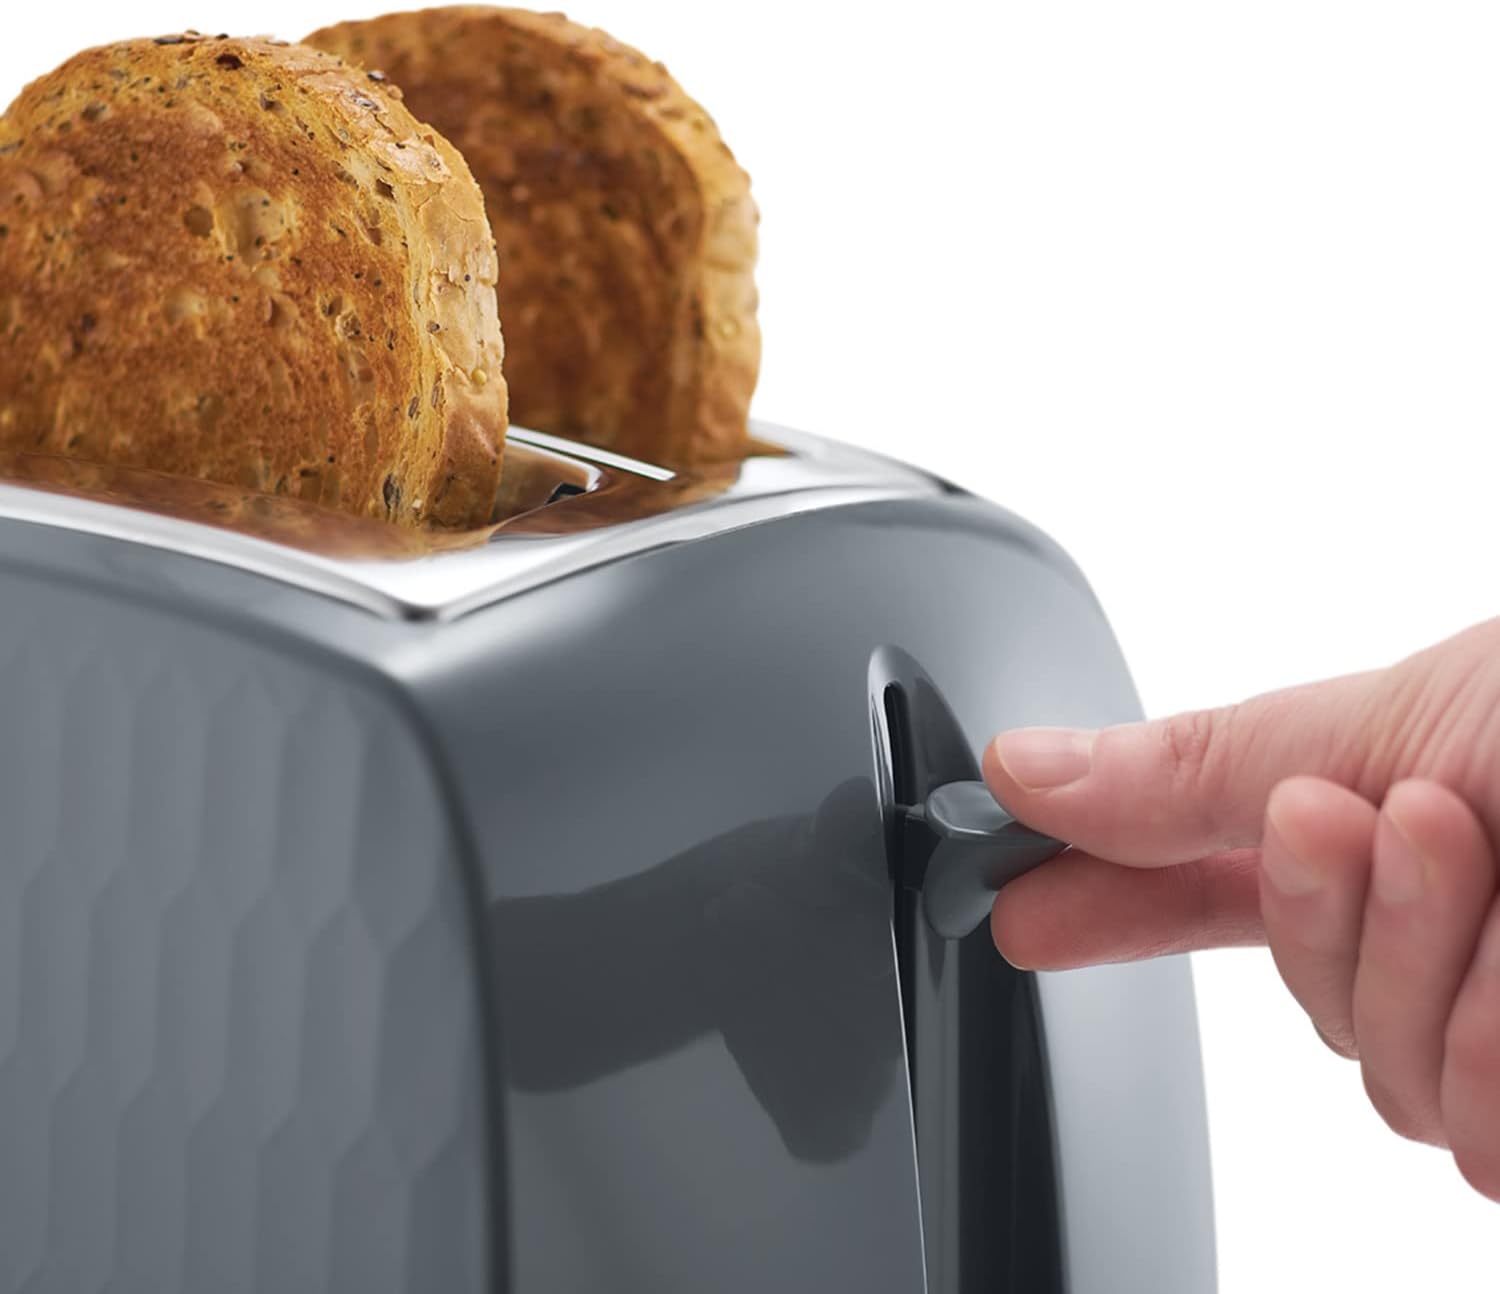 Russell Hobbs Honeycomb 2 Slice Toaster - with Extra Wide Slots and High Lift Feature, Grey